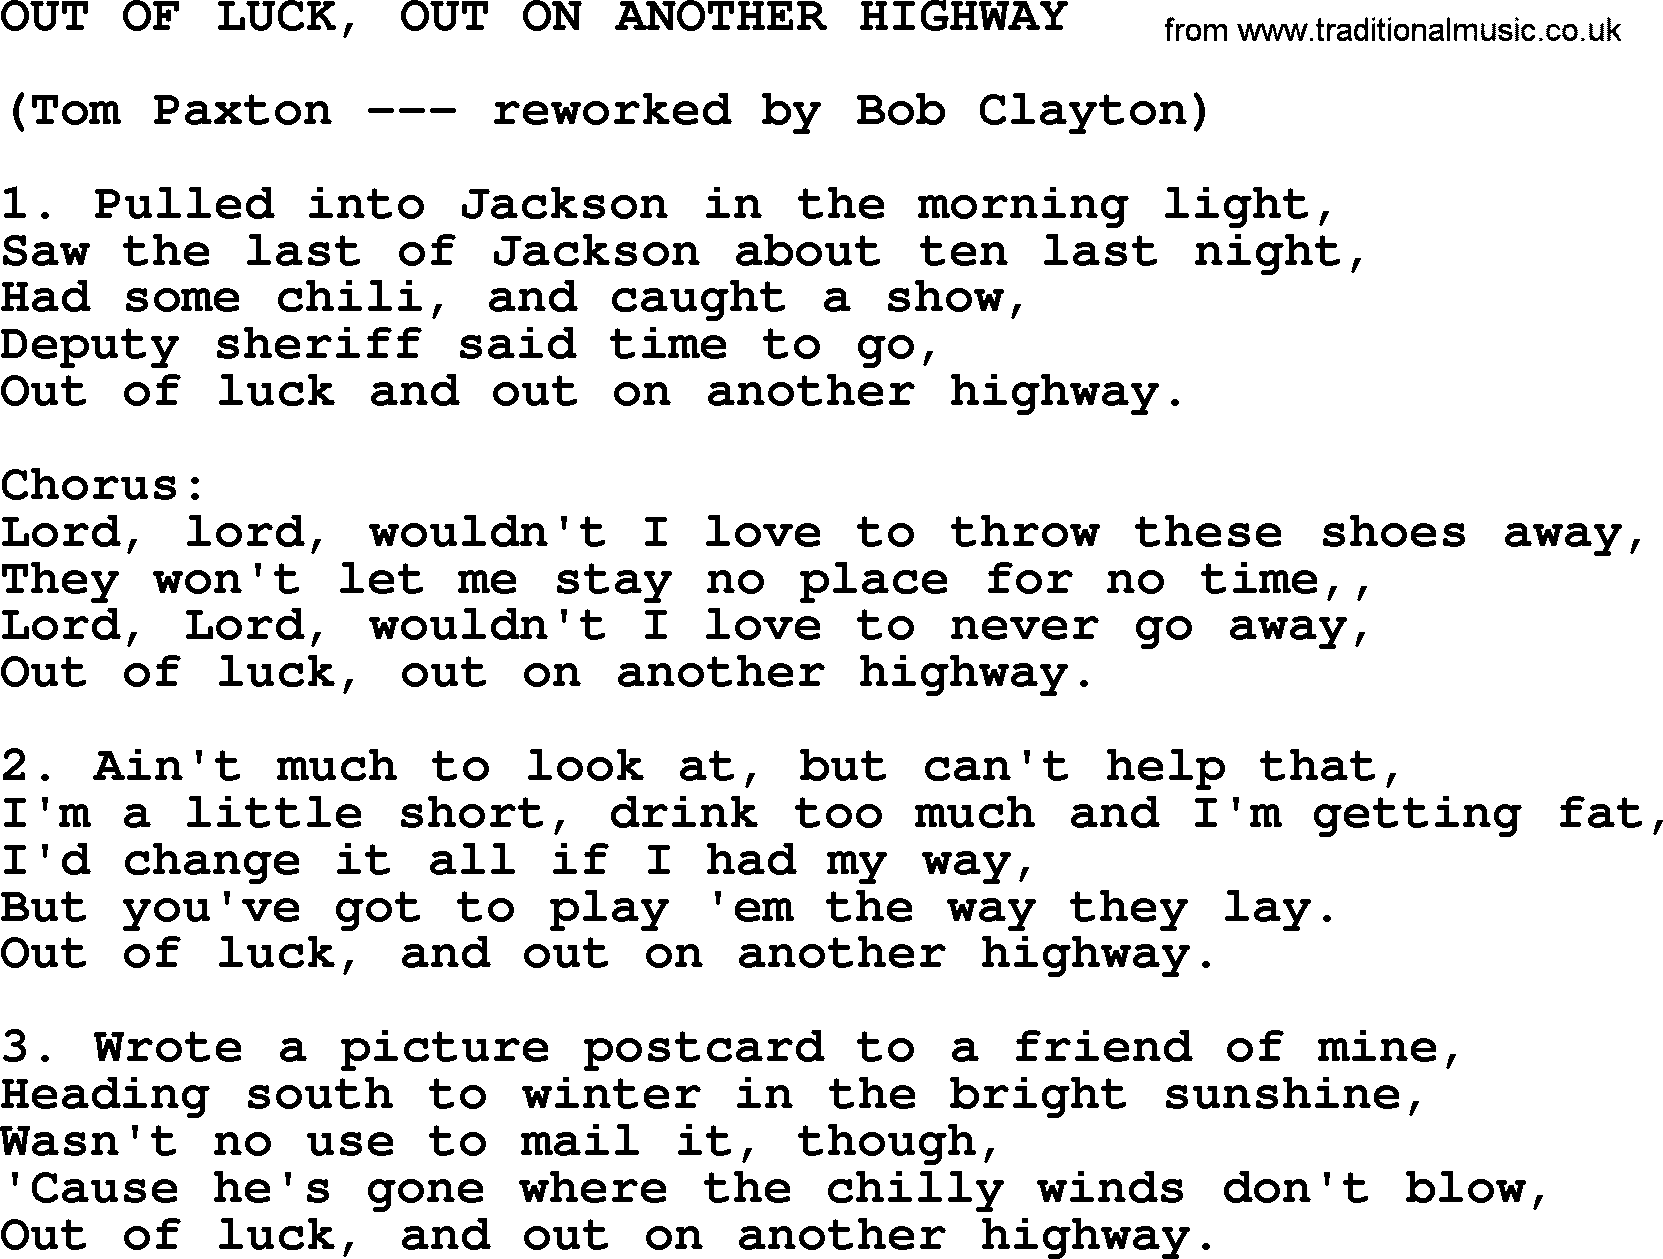 Tom Paxton song: Out Of Luck, Out On Another Highway, lyrics